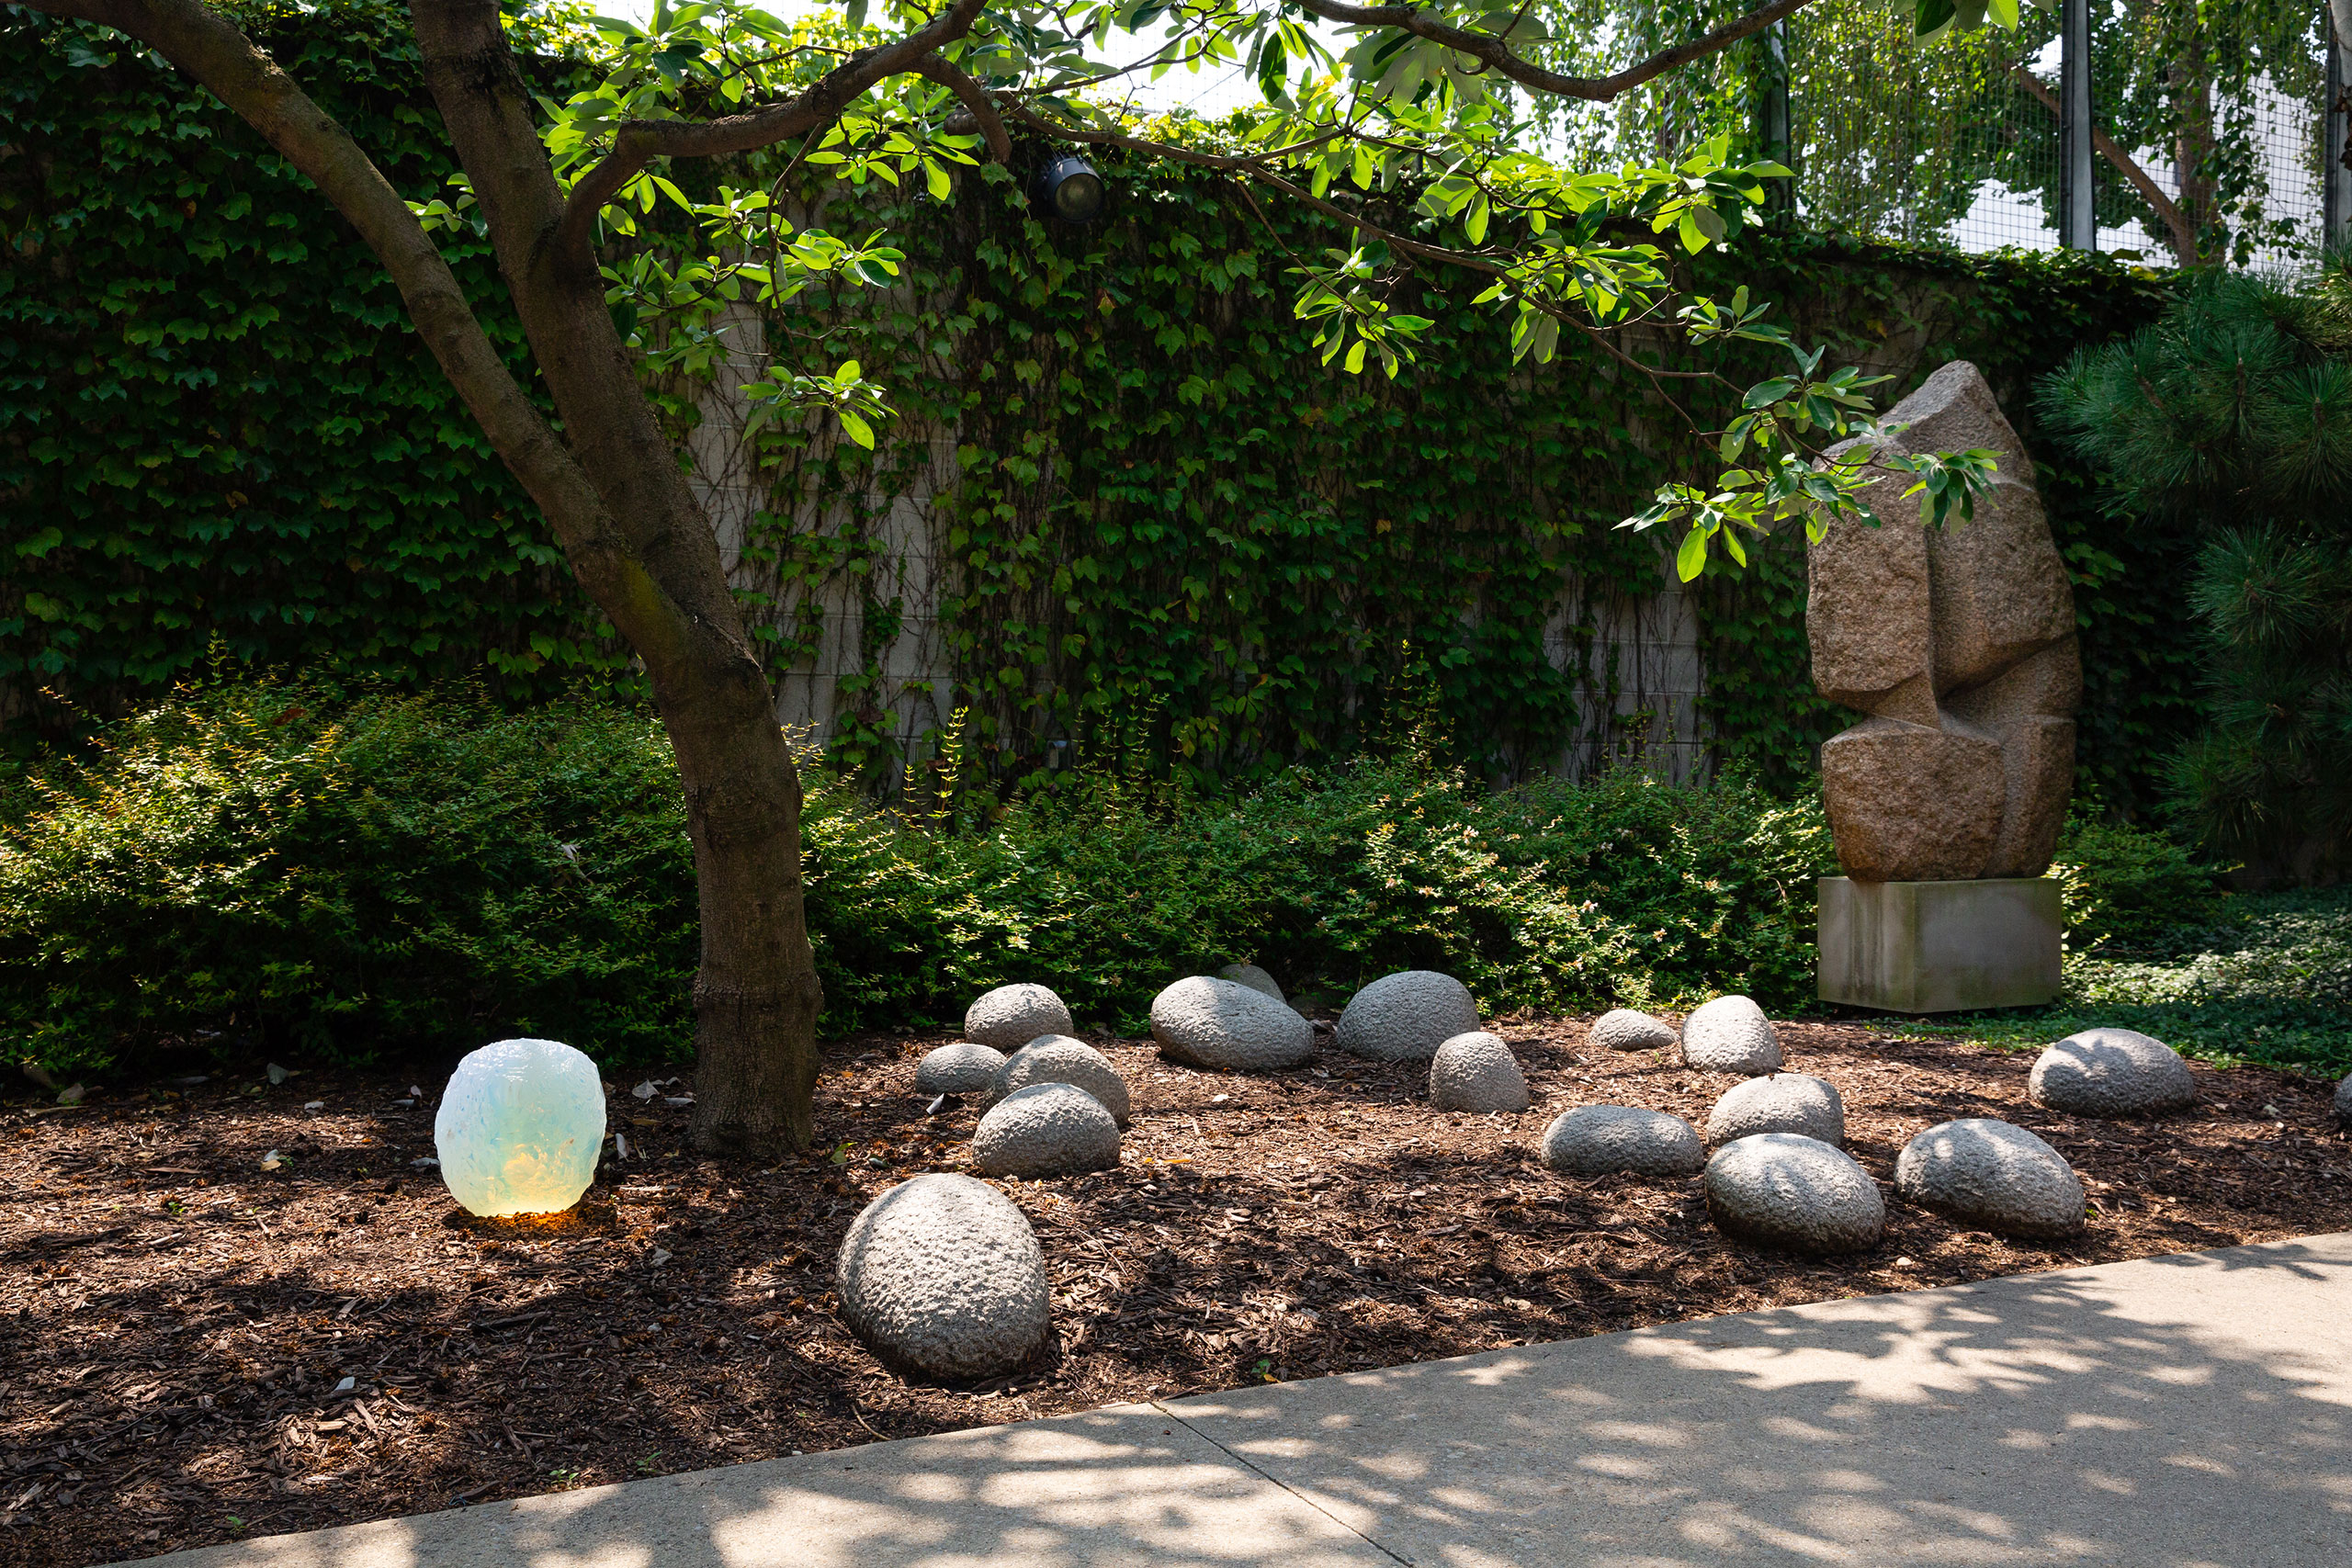 Installation view. "Objects of Common Interest: Hard, Soft, and All Lit Up with Nowhere to Go", Noguchi Museum, New York. Photography by Brian W. Ferry. Artworks © Objects of Common Interest and © The Isamu Noguchi Foundation and Garden Museum / Artists Rights Society